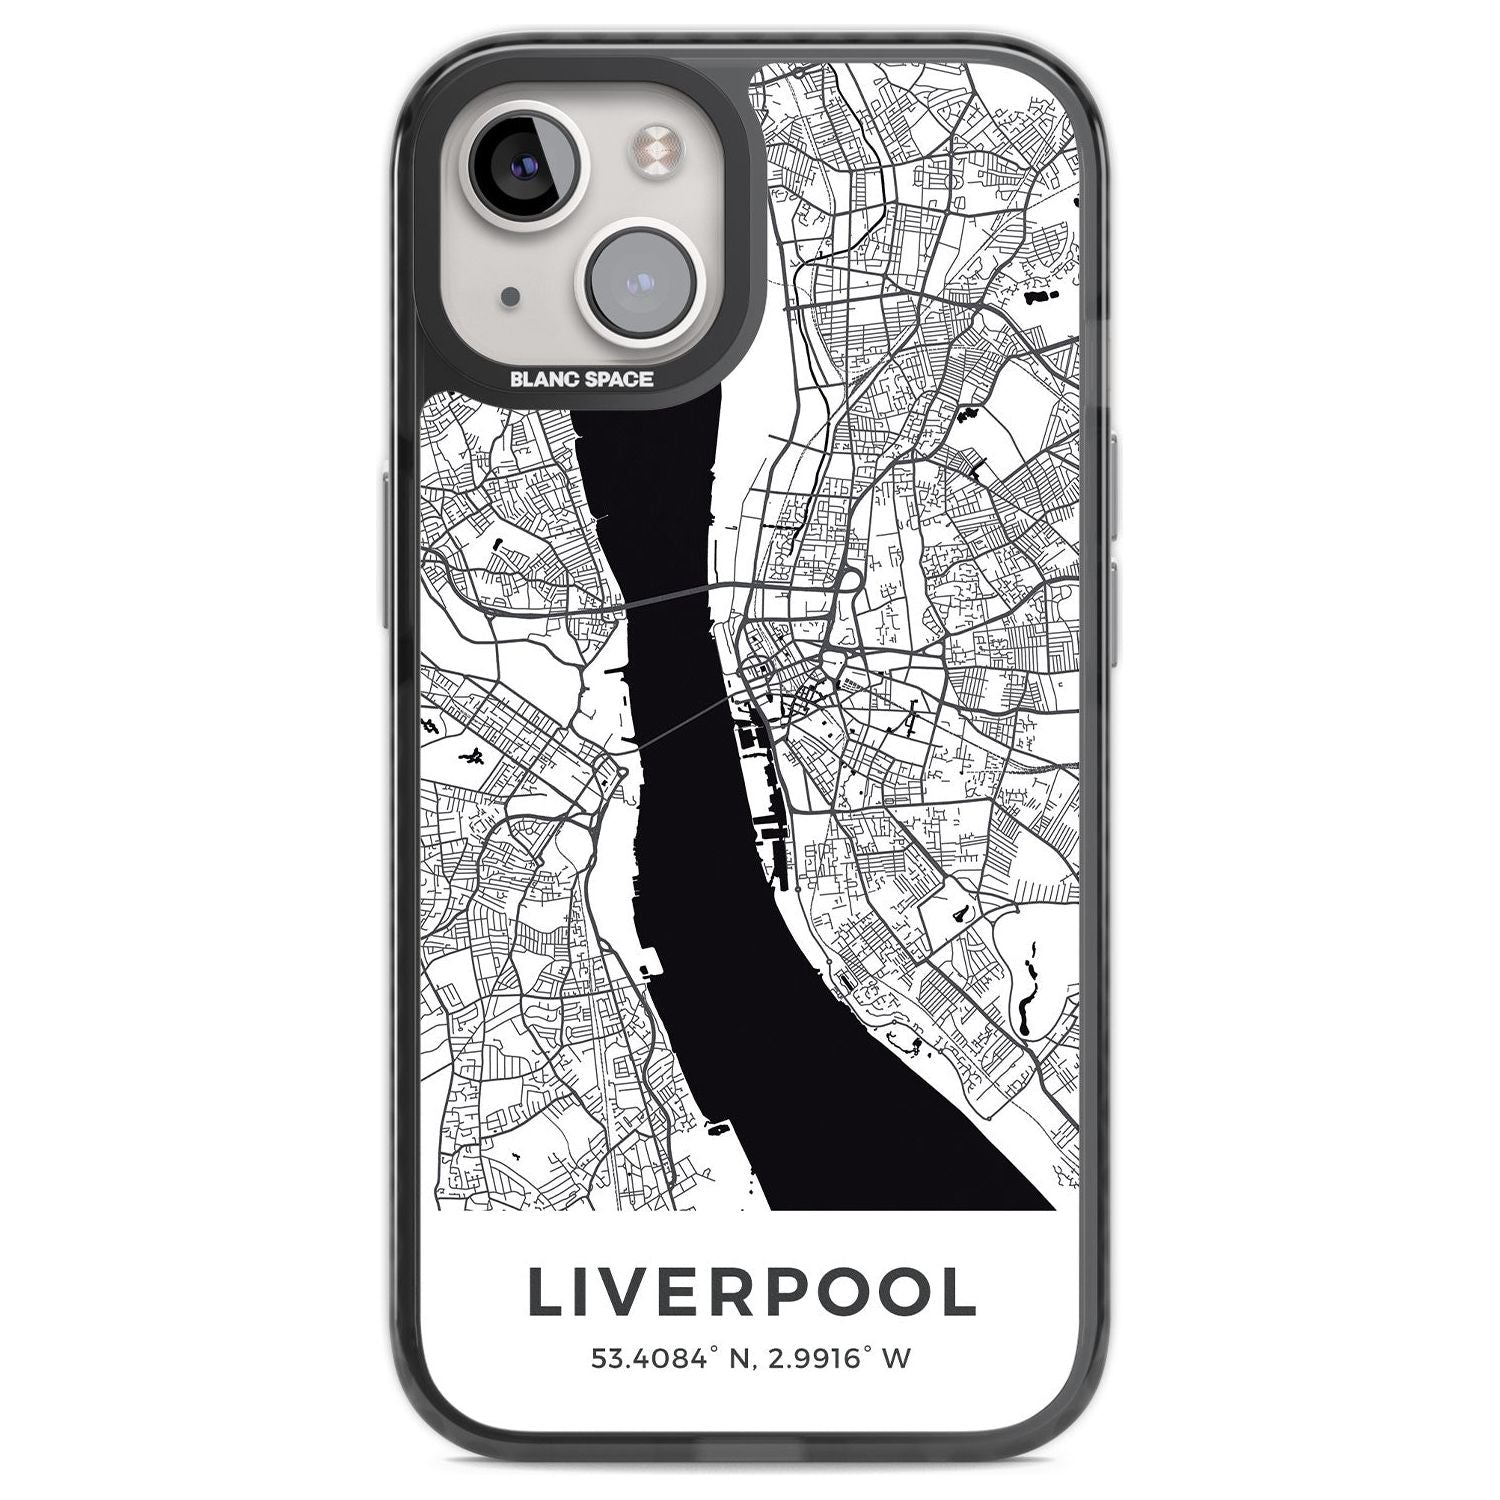 Map of Liverpool, England Phone Case iPhone 12 / Black Impact Case,iPhone 13 / Black Impact Case,iPhone 12 Pro / Black Impact Case,iPhone 14 / Black Impact Case,iPhone 15 Plus / Black Impact Case,iPhone 15 / Black Impact Case Blanc Space